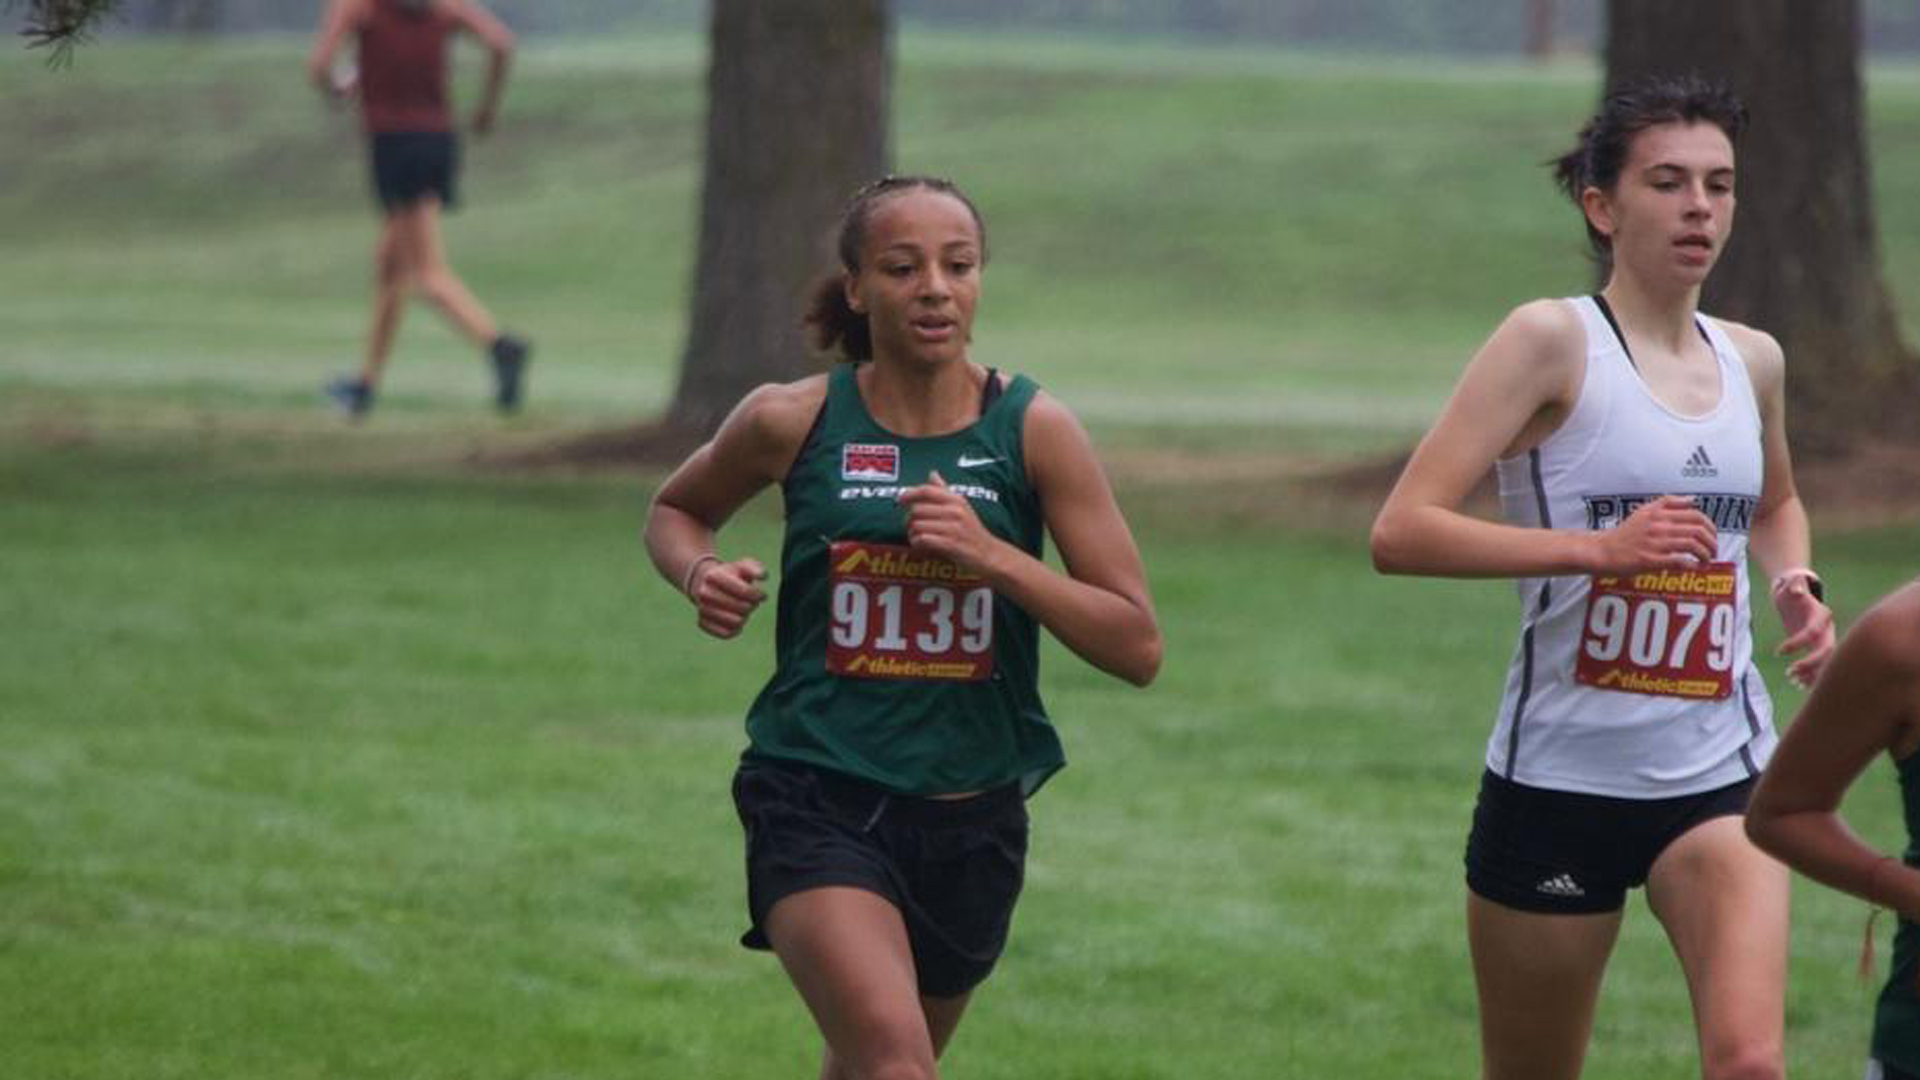 Women's Cross Country - The Evergreen State College